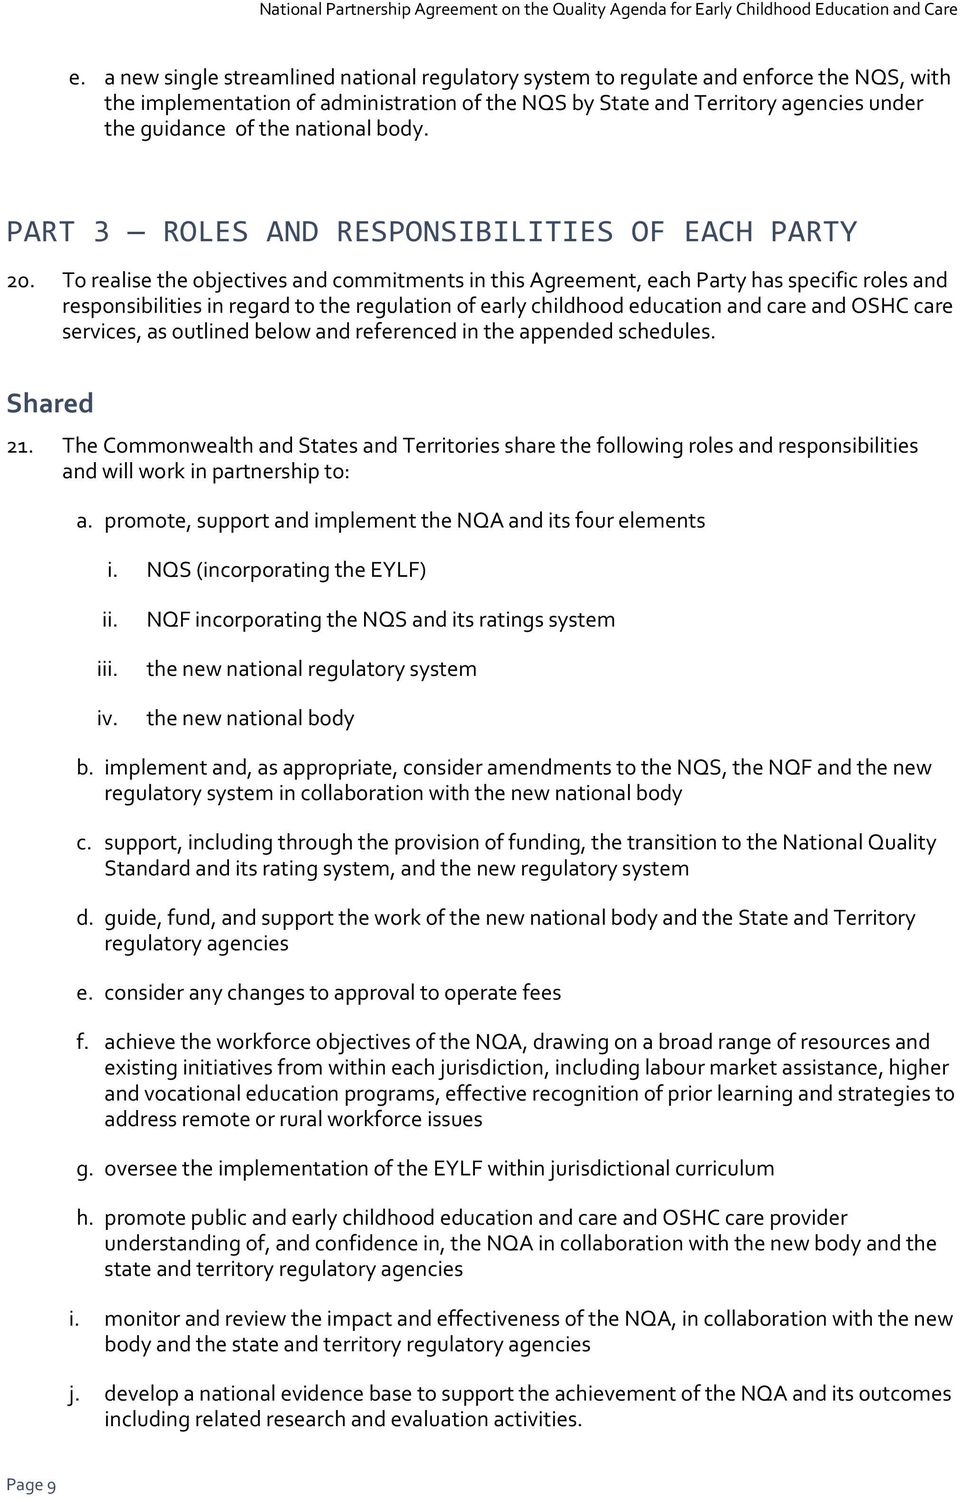 To realise the objectives and commitments in this Agreement, each Party has specific roles and responsibilities in regard to the regulation of early childhood education and care and OSHC care